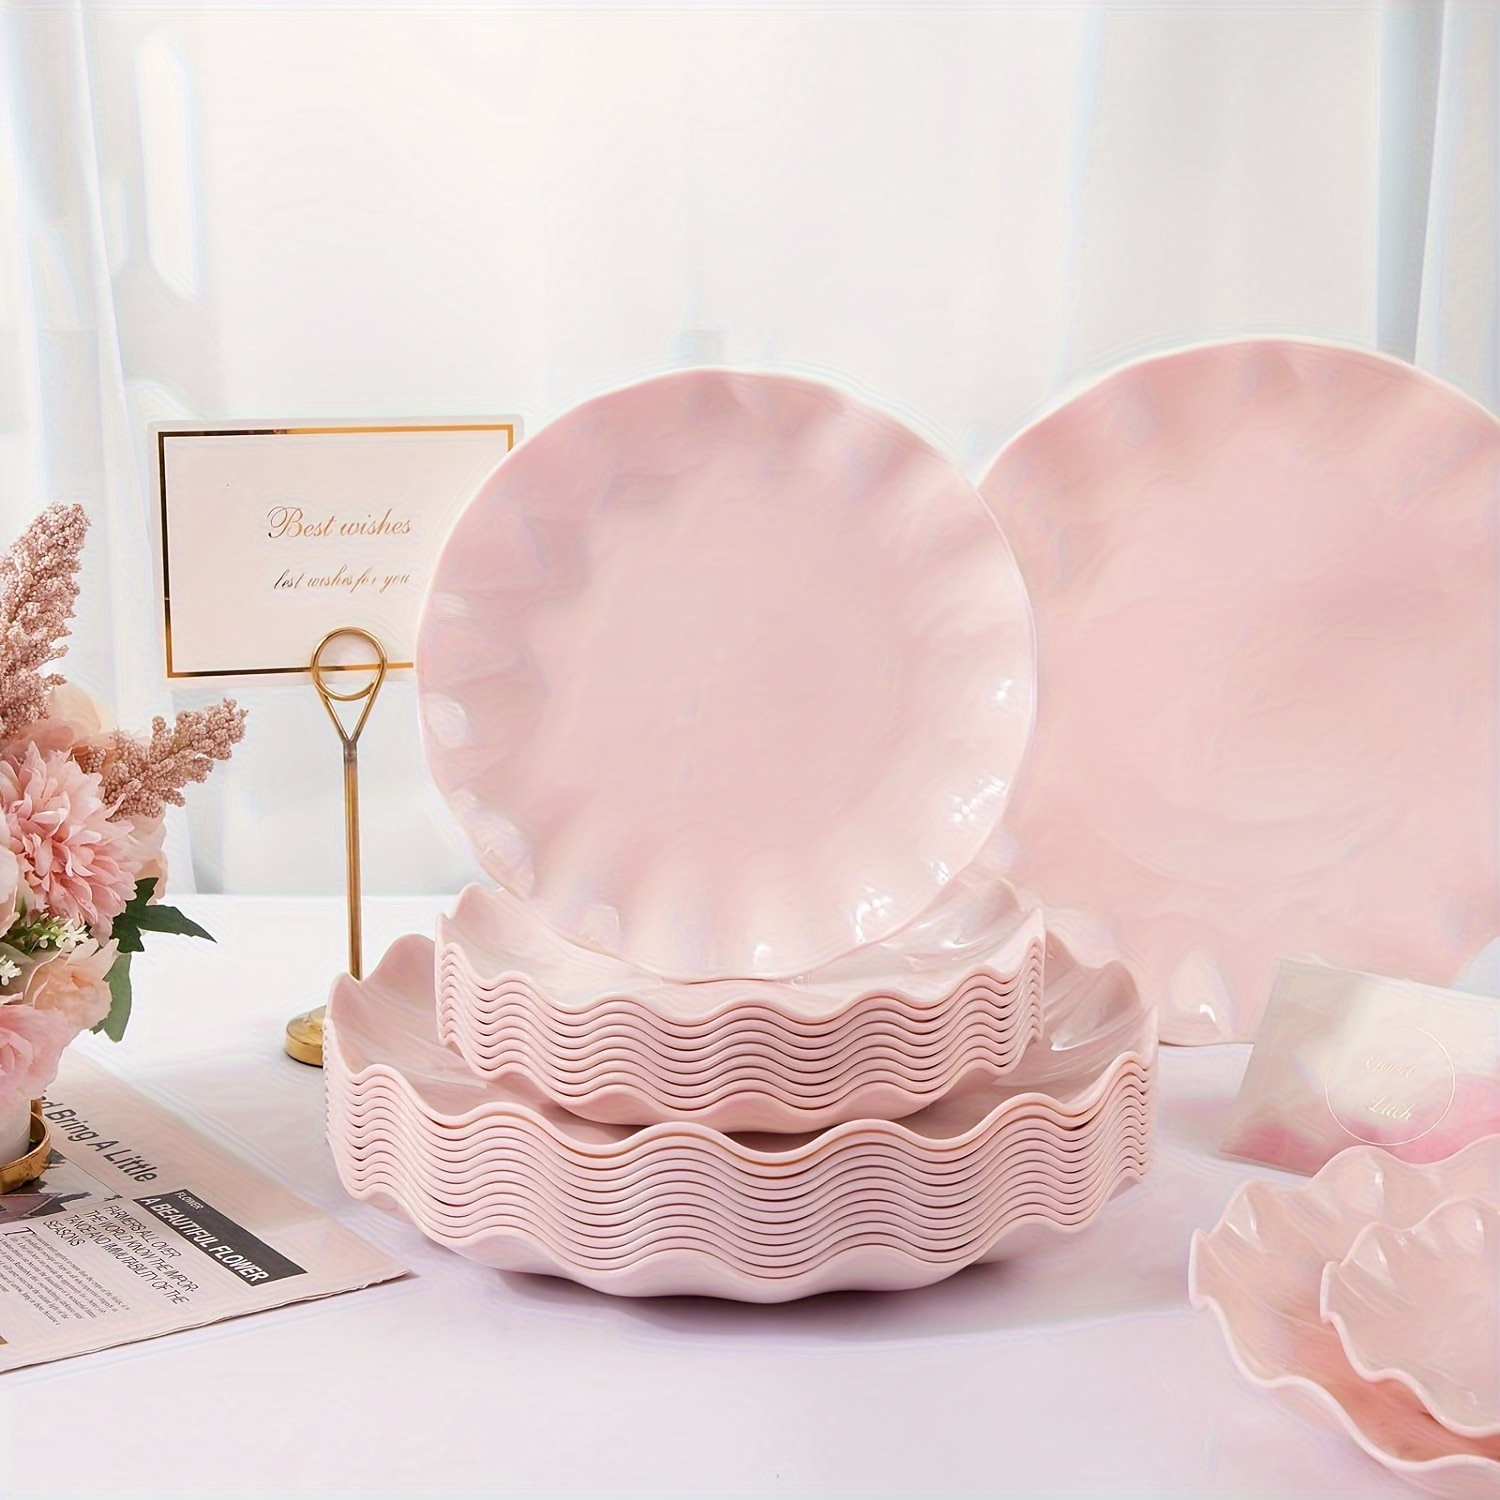 

24pcs, Pink Plates, Reusable Unbreakable Dinner Plates And Salad Plates, Plastic Durable And Microwave Dishwasher Safe, Light Weight Daisy Plastic Plates For Wedding, Party, Birthday